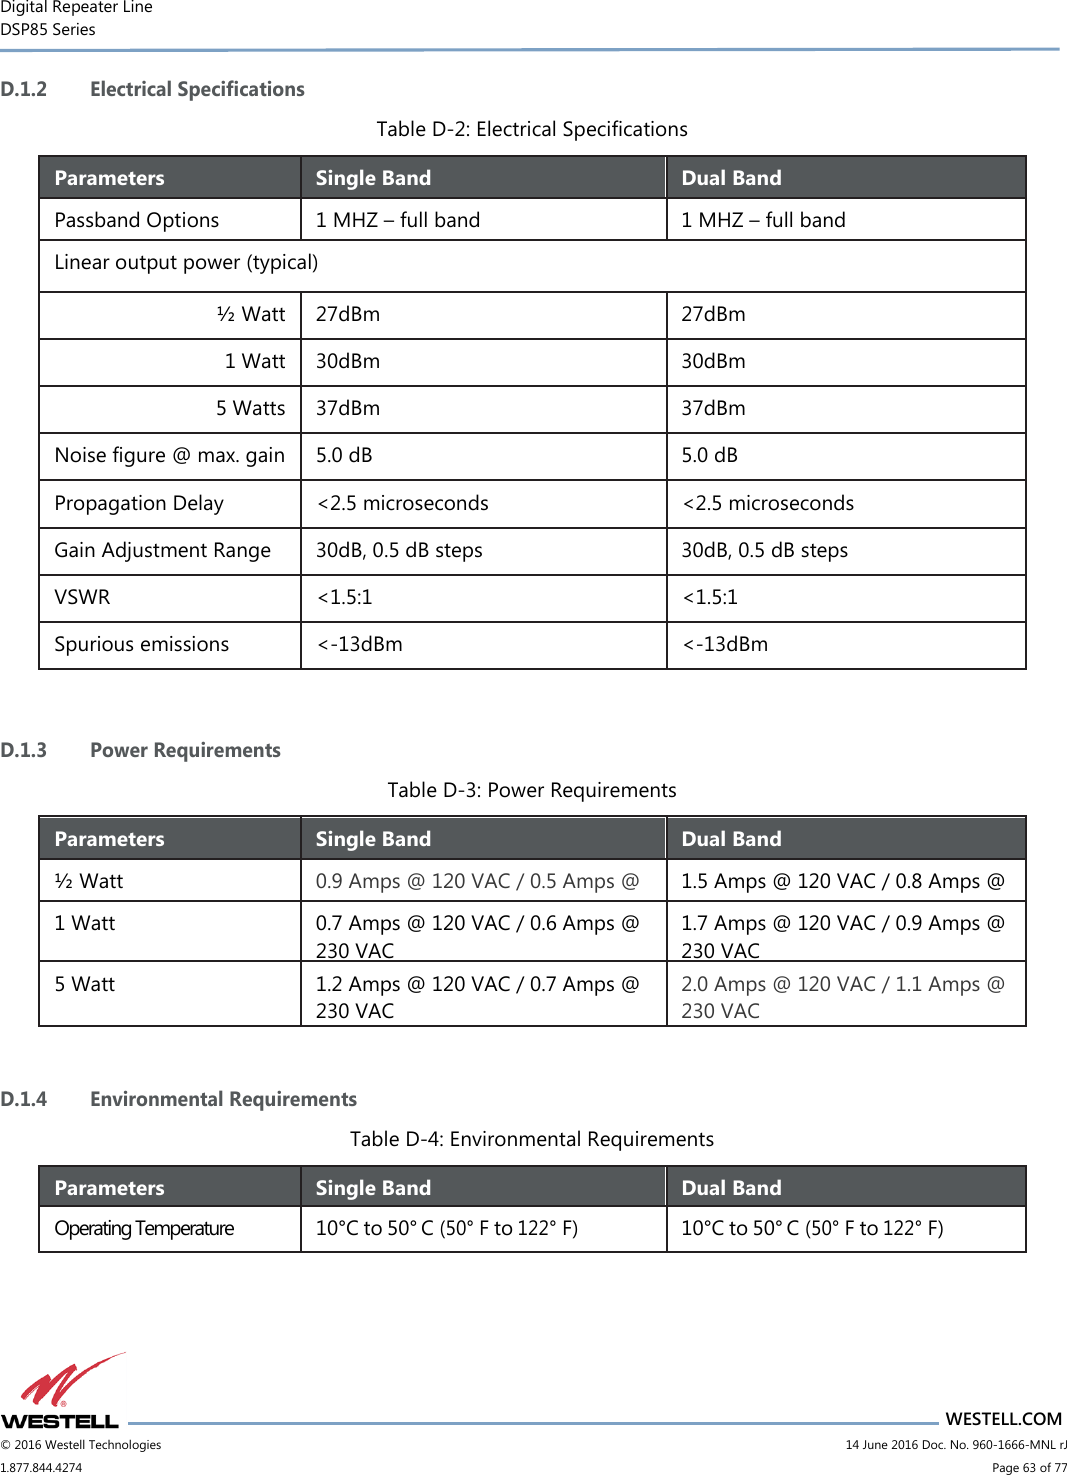 Digital Repeater Line DSP85 Series                       WESTELL.COM © 2016 Westell Technologies                         14 June 2016 Doc. No. 960-1666-MNL rJ 1.877.844.4274                             Page 63 of 77  D.1.2 Electrical Specifications Table D-2: Electrical Specifications Parameters Single Band Dual Band Passband Options 1 MHZ – full band 1 MHZ – full band Linear output power (typical) ½ Watt 27dBm 27dBm 1 Watt 30dBm 30dBm 5 Watts 37dBm 37dBm Noise figure @ max. gain 5.0 dB 5.0 dB Propagation Delay &lt;2.5 microseconds &lt;2.5 microseconds Gain Adjustment Range 30dB, 0.5 dB steps 30dB, 0.5 dB steps VSWR &lt;1.5:1 &lt;1.5:1 Spurious emissions &lt;-13dBm &lt;-13dBm  D.1.3 Power Requirements Table D-3: Power Requirements Parameters Single Band Dual Band ½ Watt 0.9 Amps @ 120 VAC / 0.5 Amps @ 230 VAC 1.5 Amps @ 120 VAC / 0.8 Amps @ 230 VAC 1 Watt 0.7 Amps @ 120 VAC / 0.6 Amps @ 230 VAC 1.7 Amps @ 120 VAC / 0.9 Amps @ 230 VAC 5 Watt 1.2 Amps @ 120 VAC / 0.7 Amps @ 230 VAC 2.0 Amps @ 120 VAC / 1.1 Amps @ 230 VAC  D.1.4 Environmental Requirements Table D-4: Environmental Requirements Parameters Single Band Dual Band Operating Temperature 10°C to 50° C (50° F to 122° F) 10°C to 50° C (50° F to 122° F)   